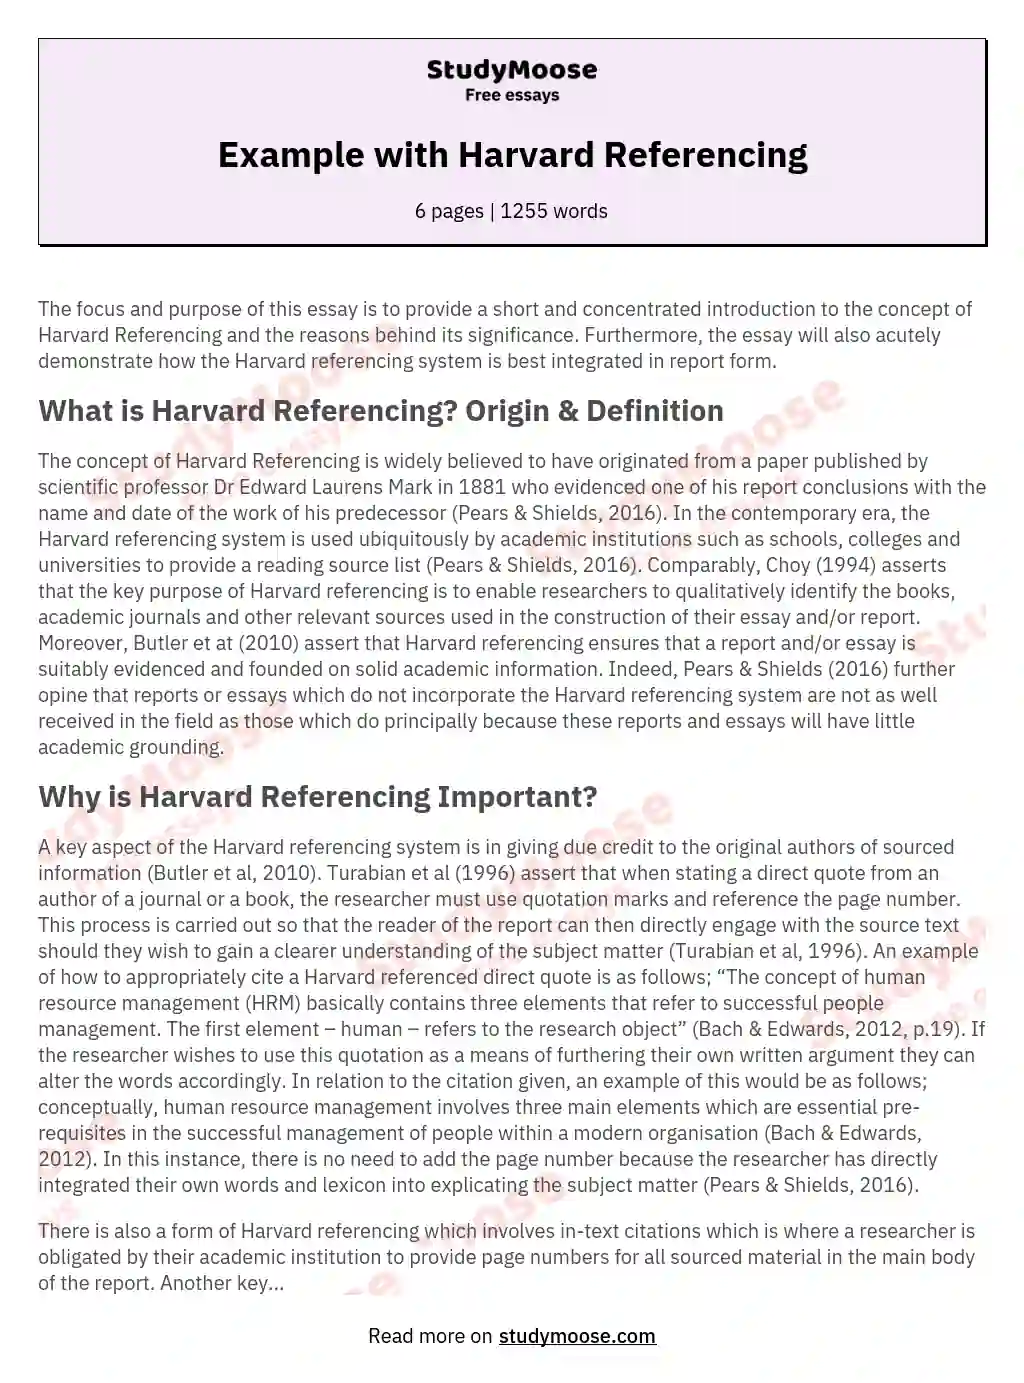 Example with Harvard Referencing essay